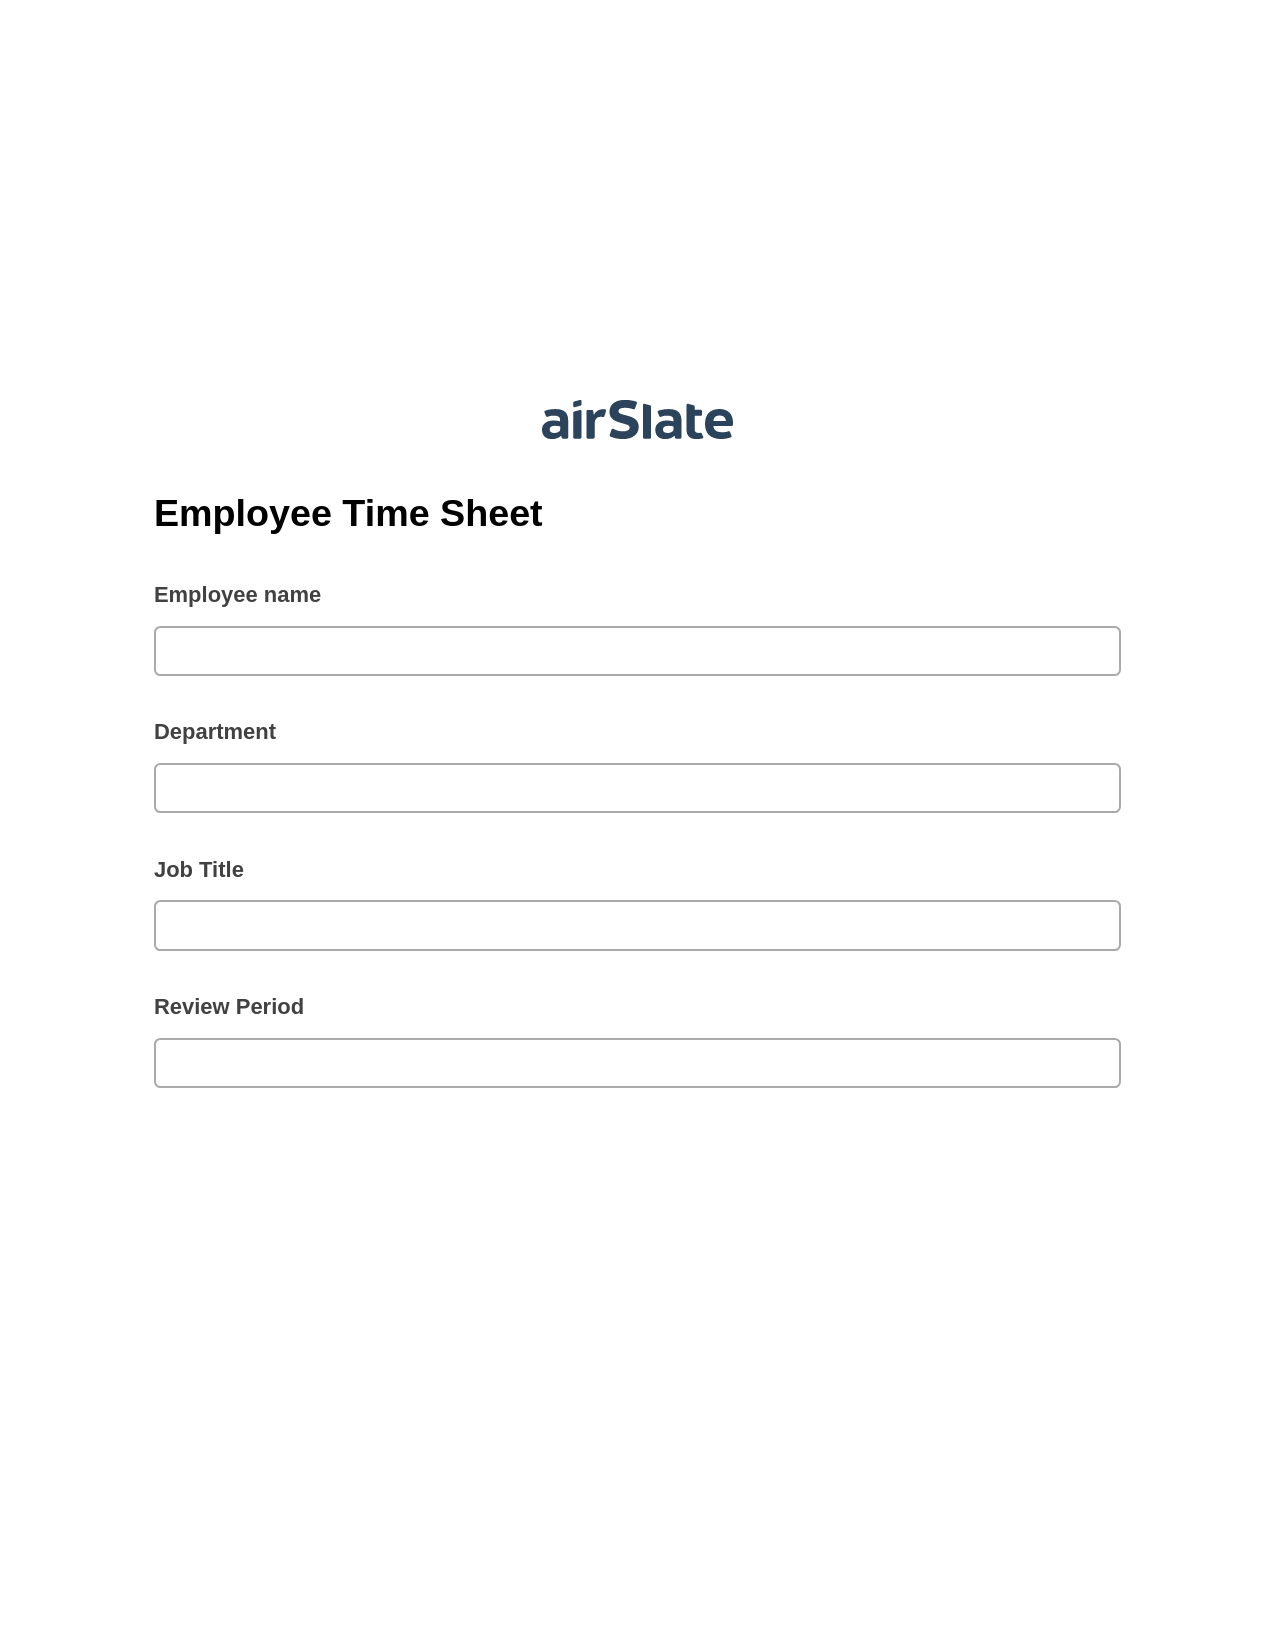 Multirole Employee Time Sheet Pre-fill Dropdowns from Google Sheet Bot, Create slate addon, Export to Excel 365 Bot